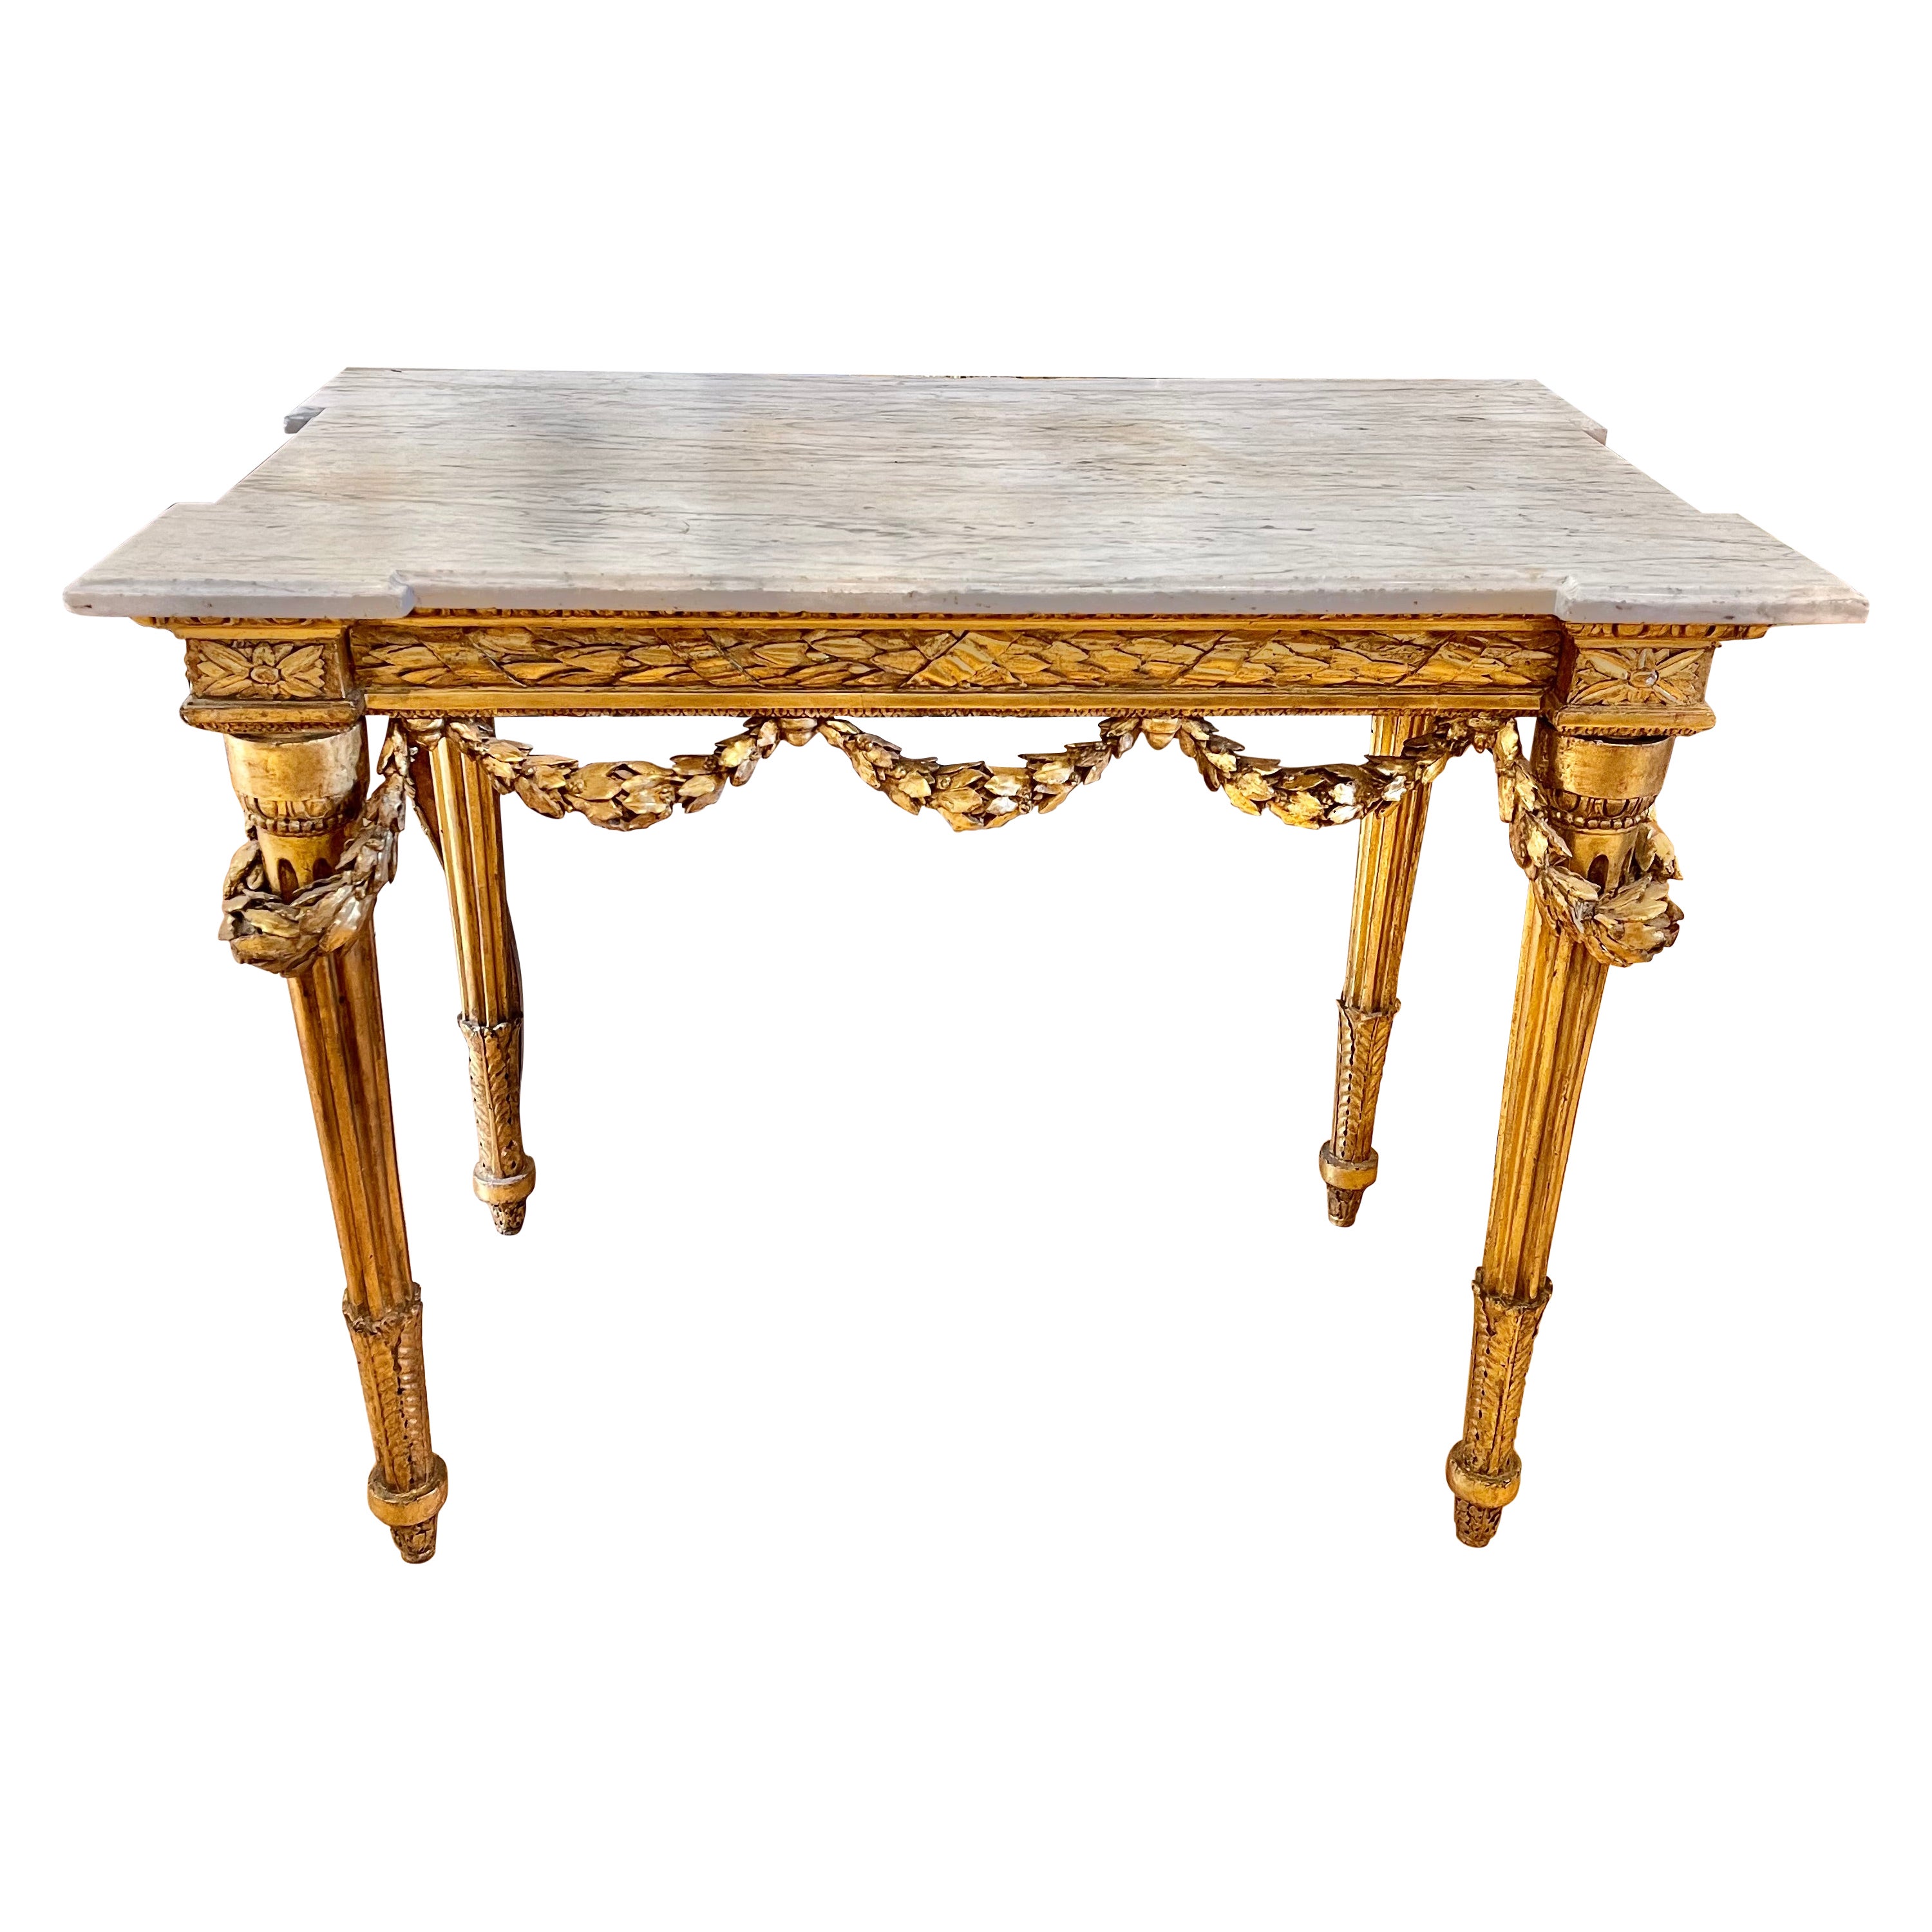 Early 19th Century Italian Giltwood Marble Top Console Table